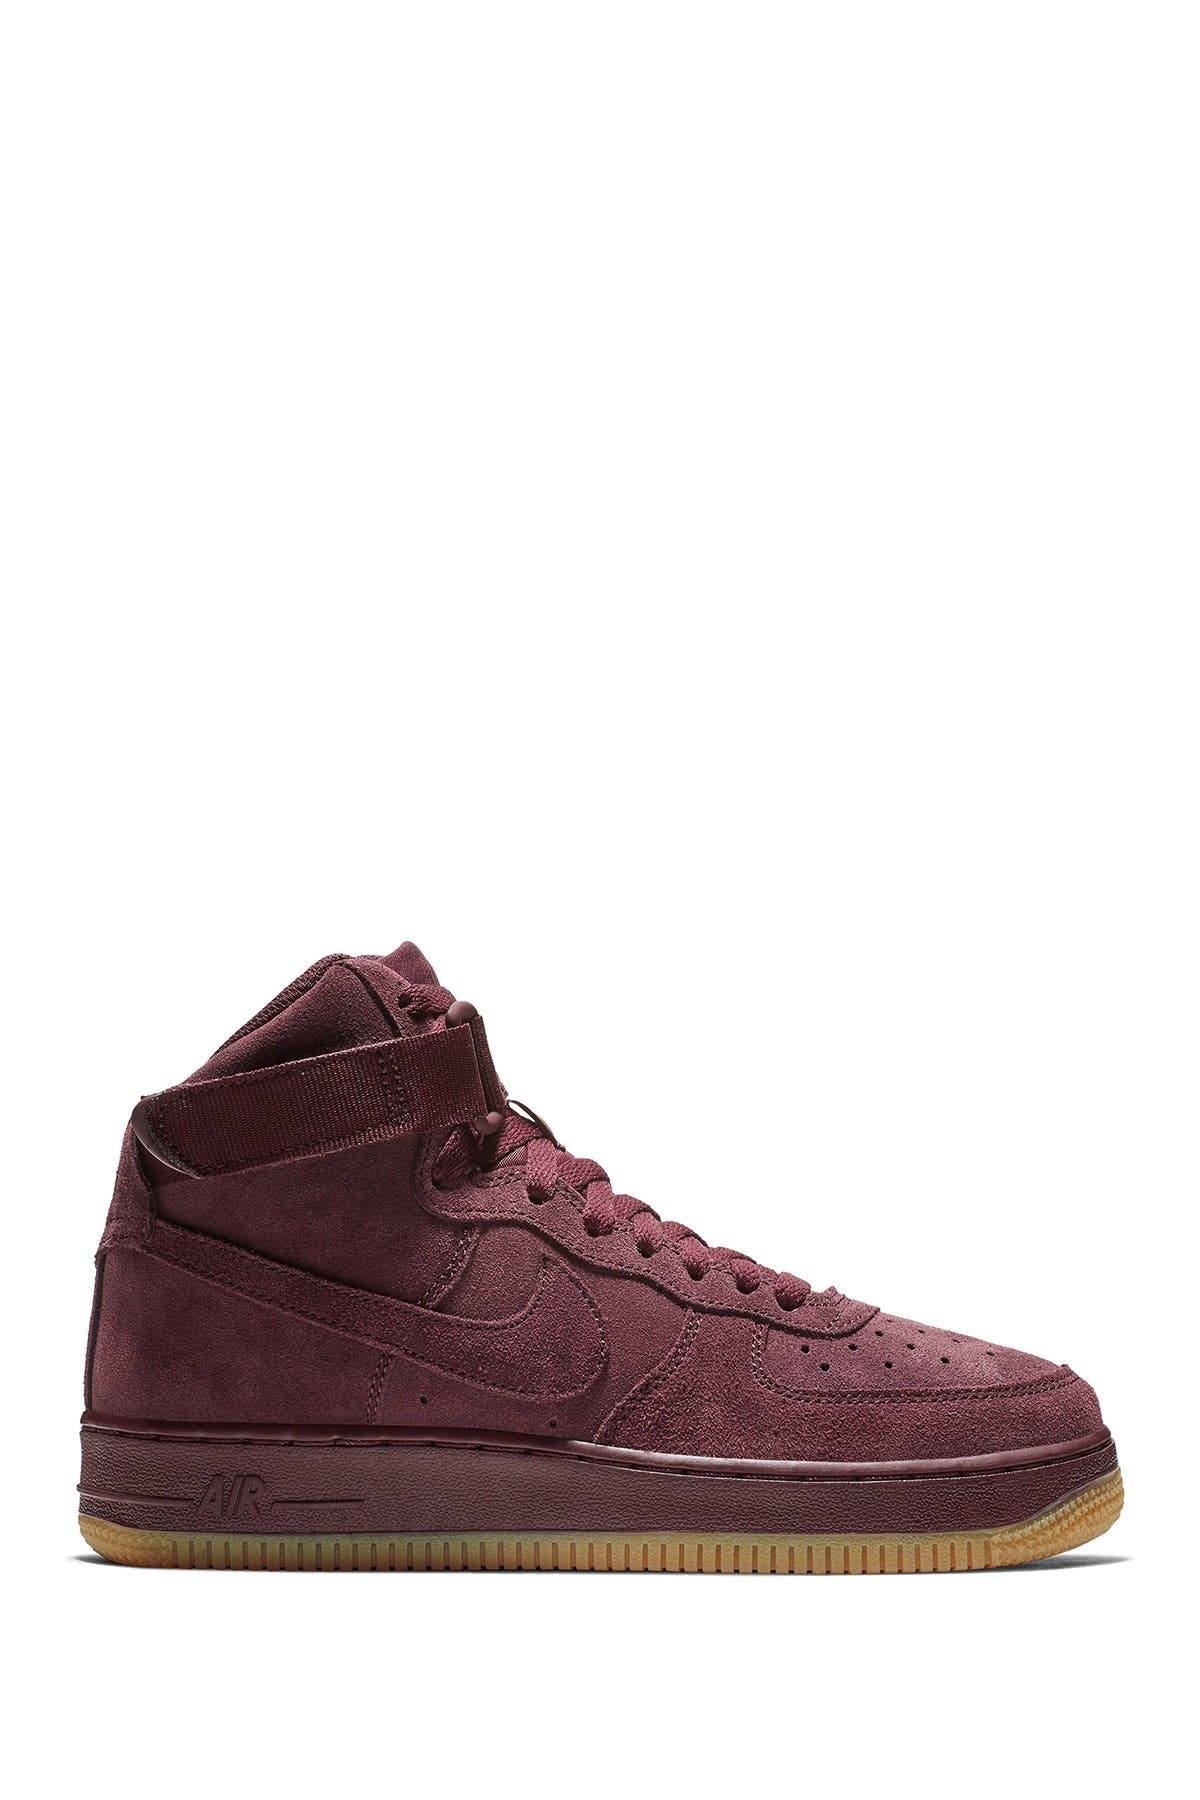 air force 1 suede high